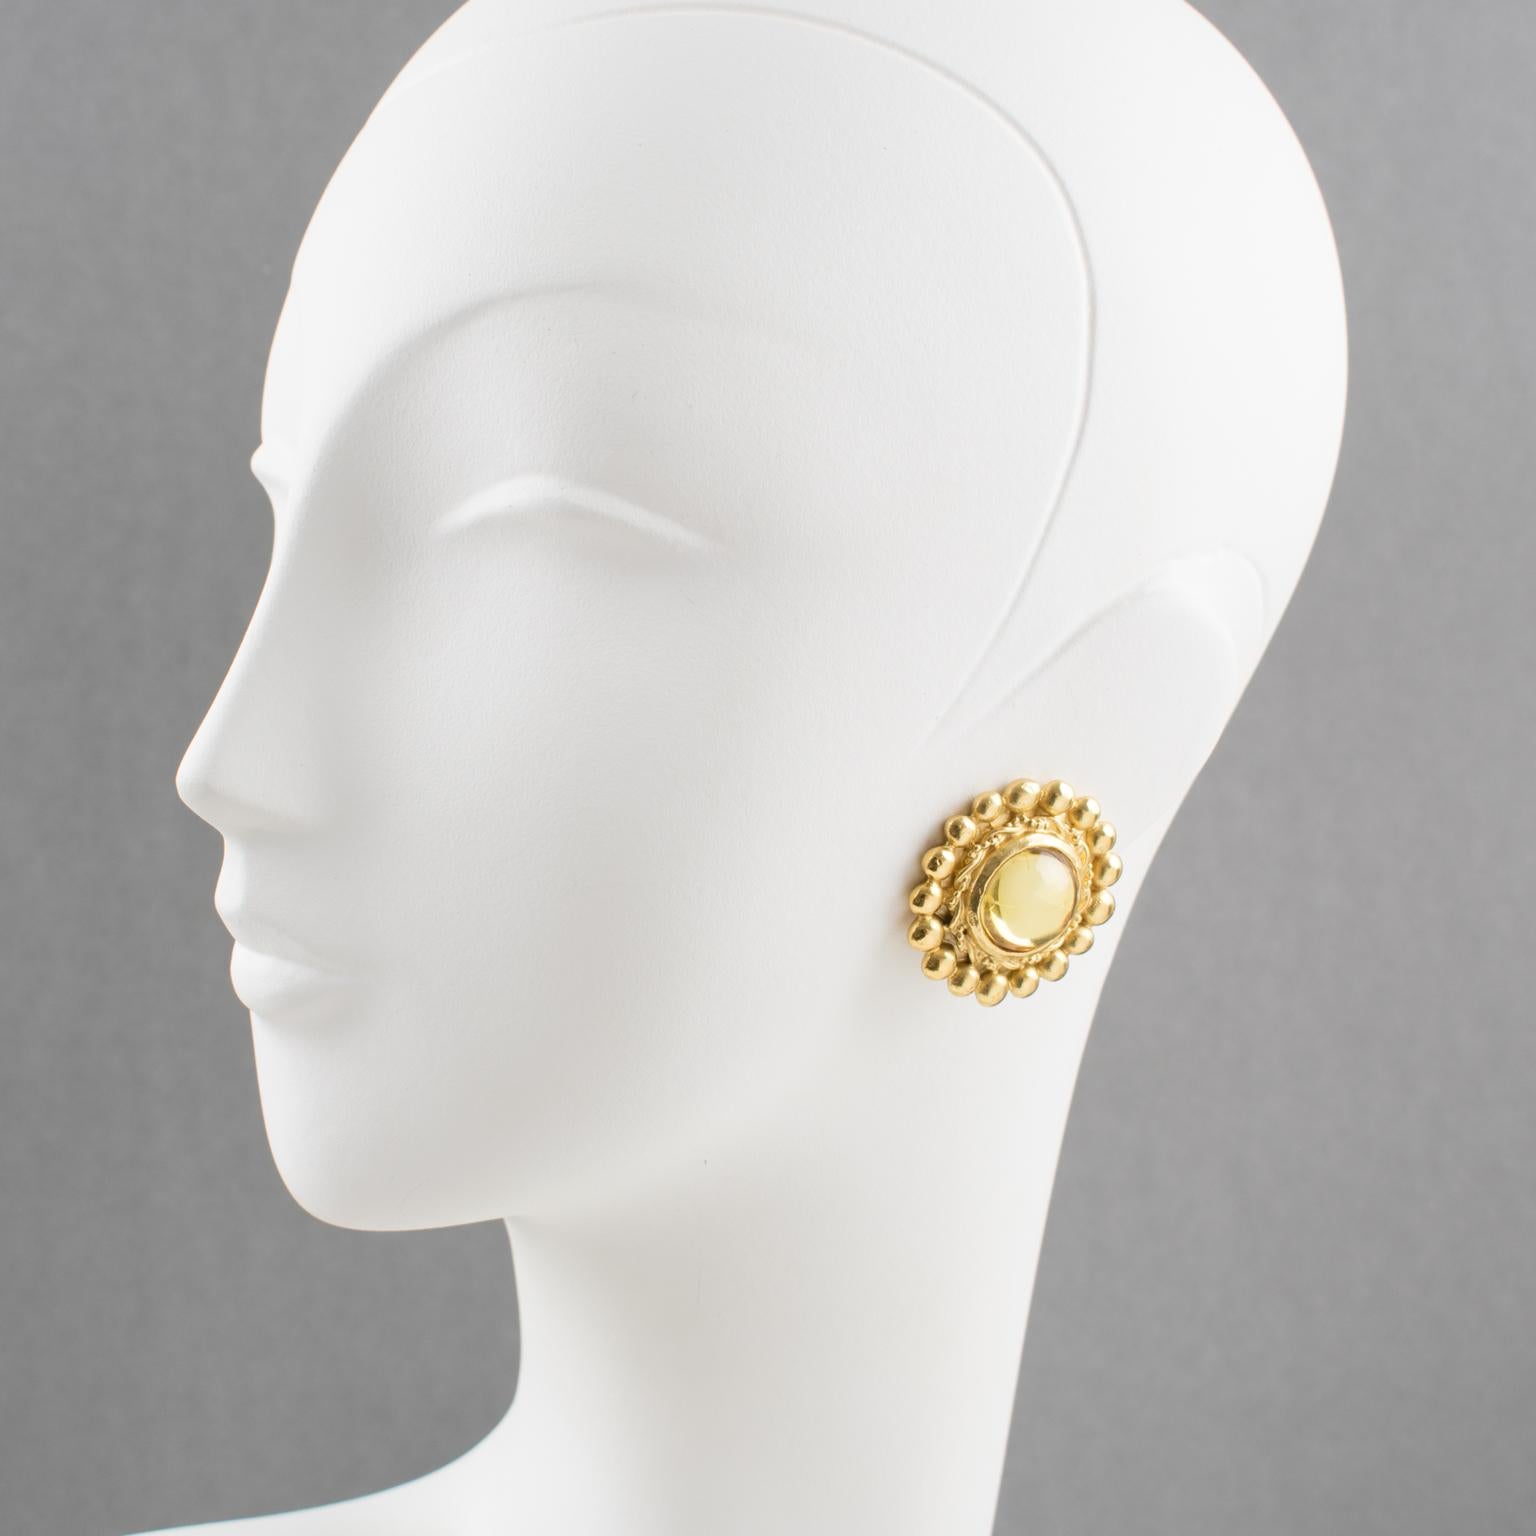 Elegant French fashion designer, Sonia Rykiel Paris signed clip-on earrings. They feature a gilt metal rounded shape with texture, topped with a large resin cabochon in light yellow champagne color. Signed underside: Sonia Rykiel - Paris.